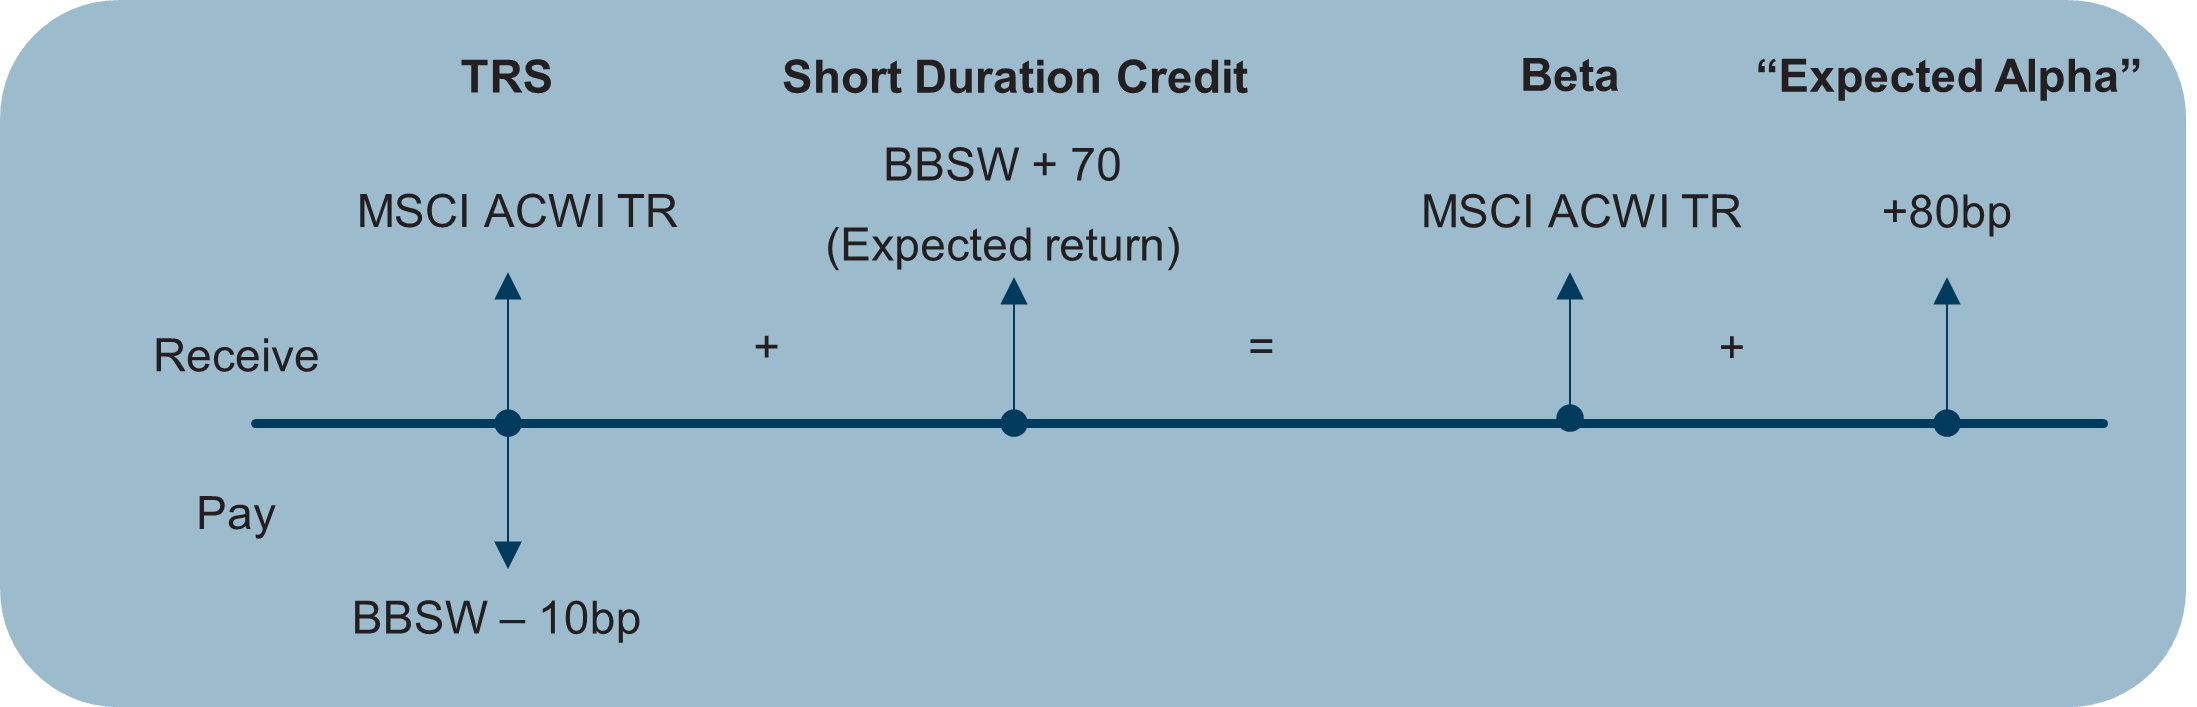 An alpha-lite solution consisting of an equity TRS and short-duration credit fund